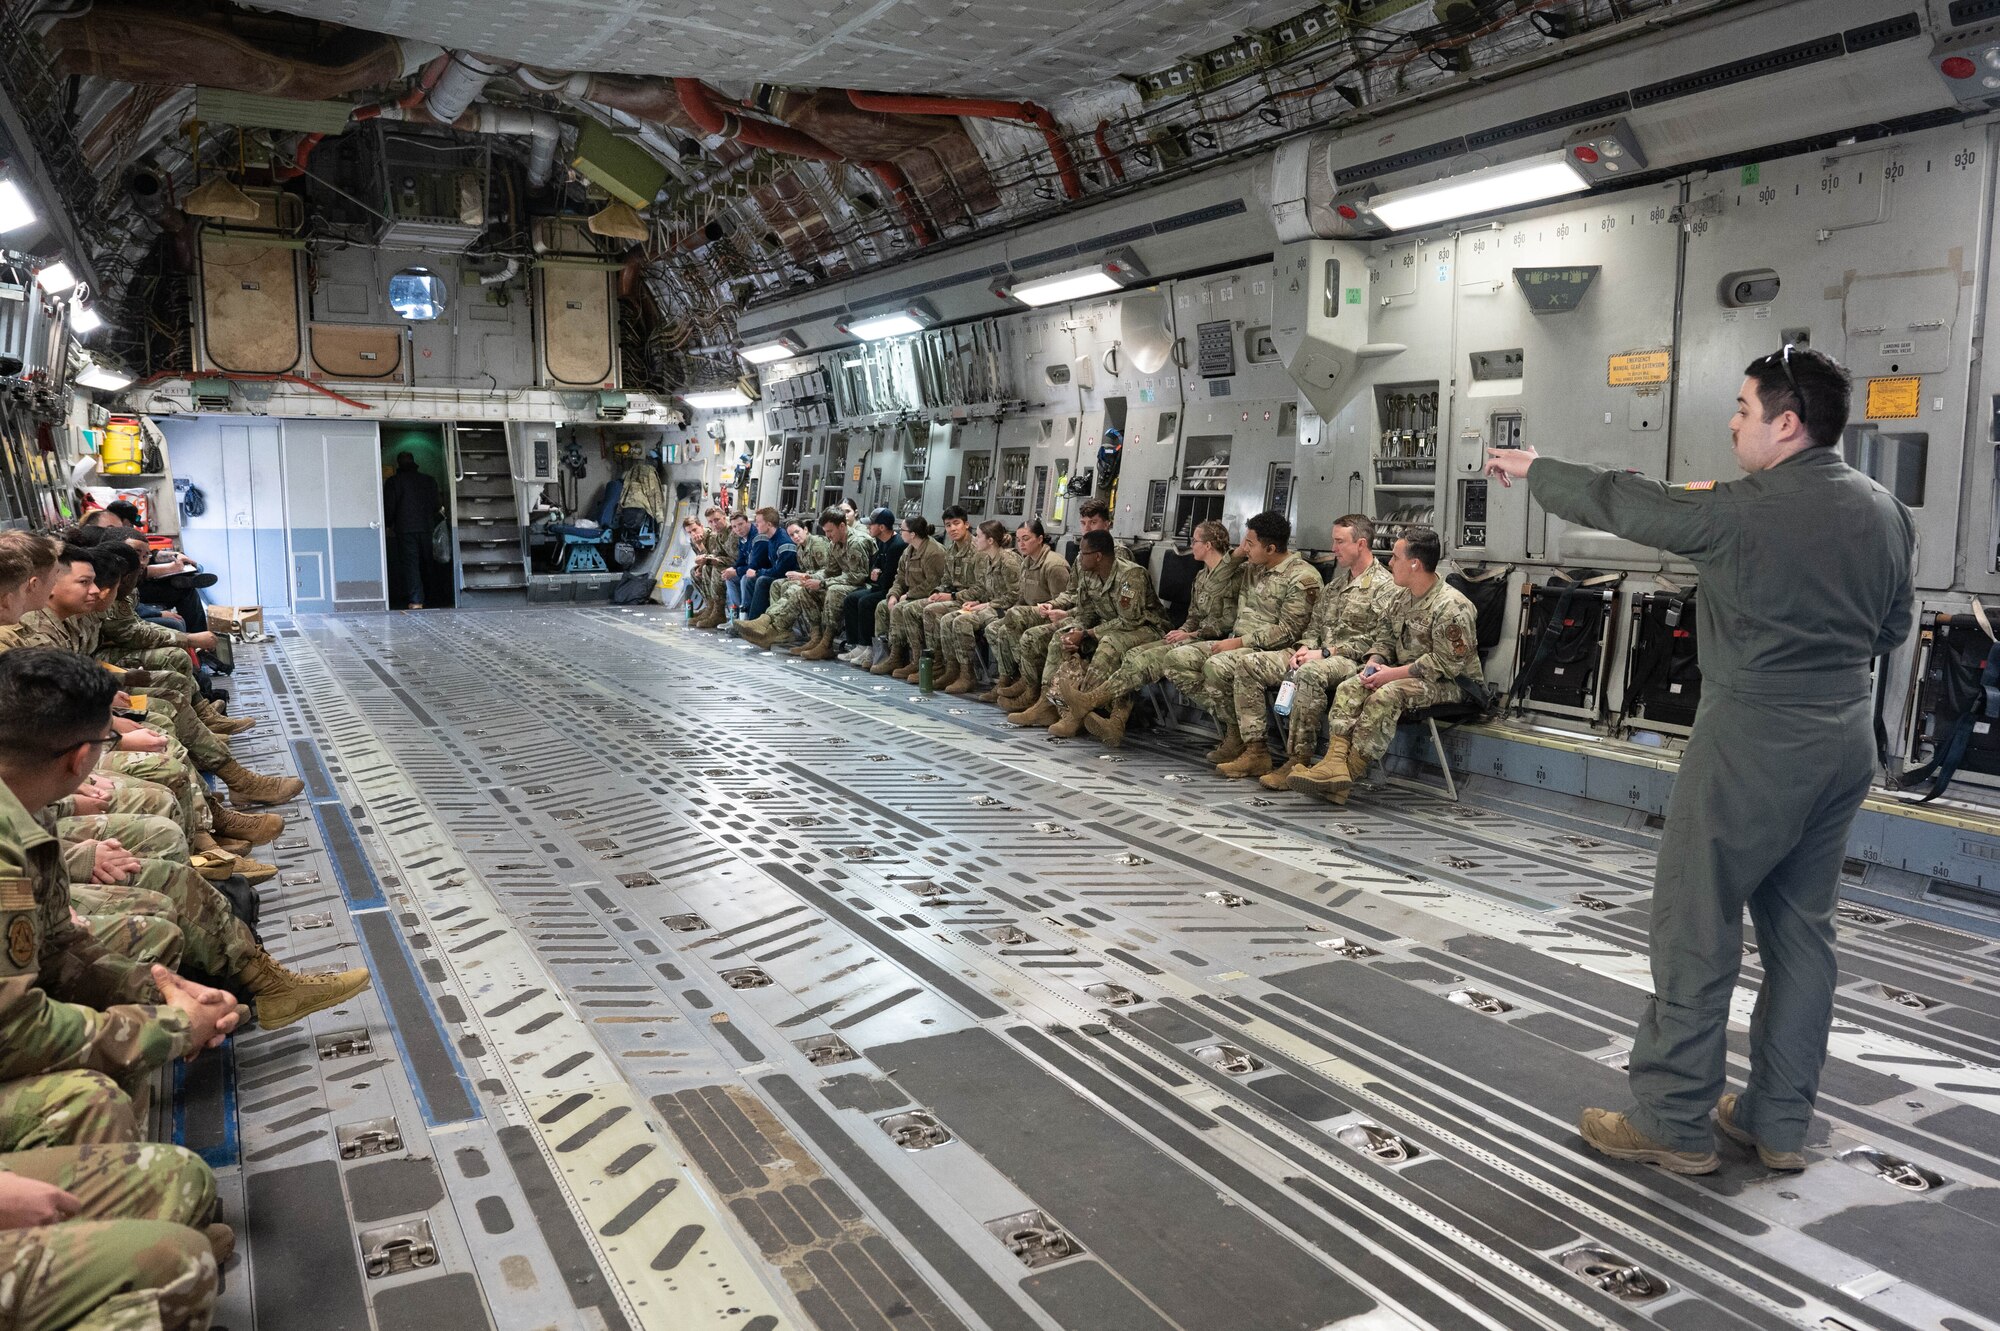 U.S. Air Force Staff Sgt. Jacob Villaruel, 58th Airlift Squadron loadmaster instructor, gives a safety brief to Air Force ROTC cadets and first term Airmen on a C-17 Globemaster III orientation flight at Altus Air Force Base, Oklahoma, March 15, 2024. The cadets and Airmen were exposed to the capabilities of the aircraft and daily operations of aircrew. (U.S. Air Force photo by Airman 1st Class Heidi Bucins)